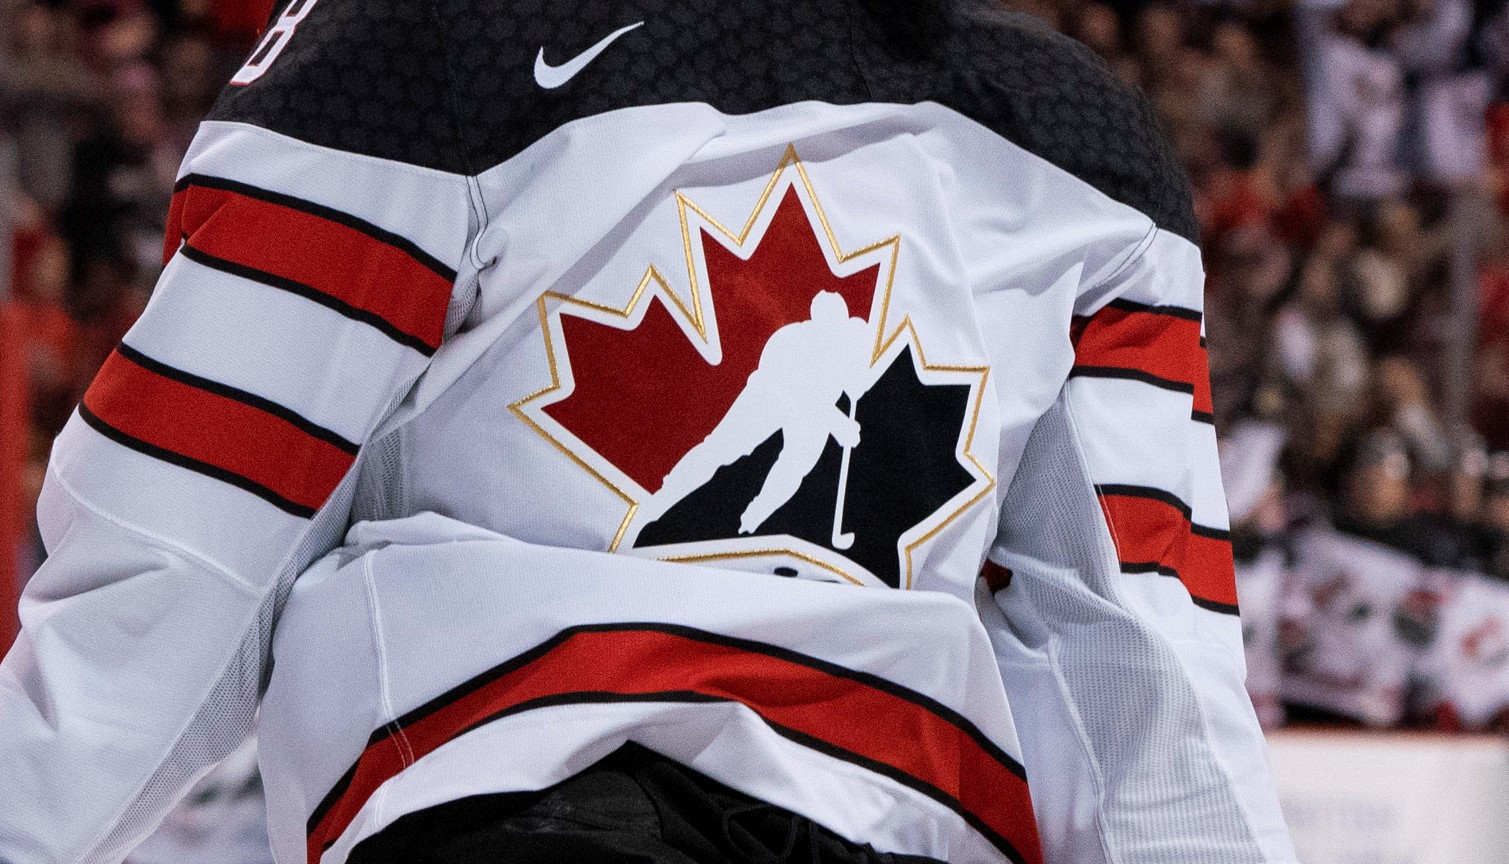 Public funds were frozen and sponsors pulled their support for Hockey Canada after revelations that paid nearly CAD$9 million in settlements following sexual assault claims ©Getty Images